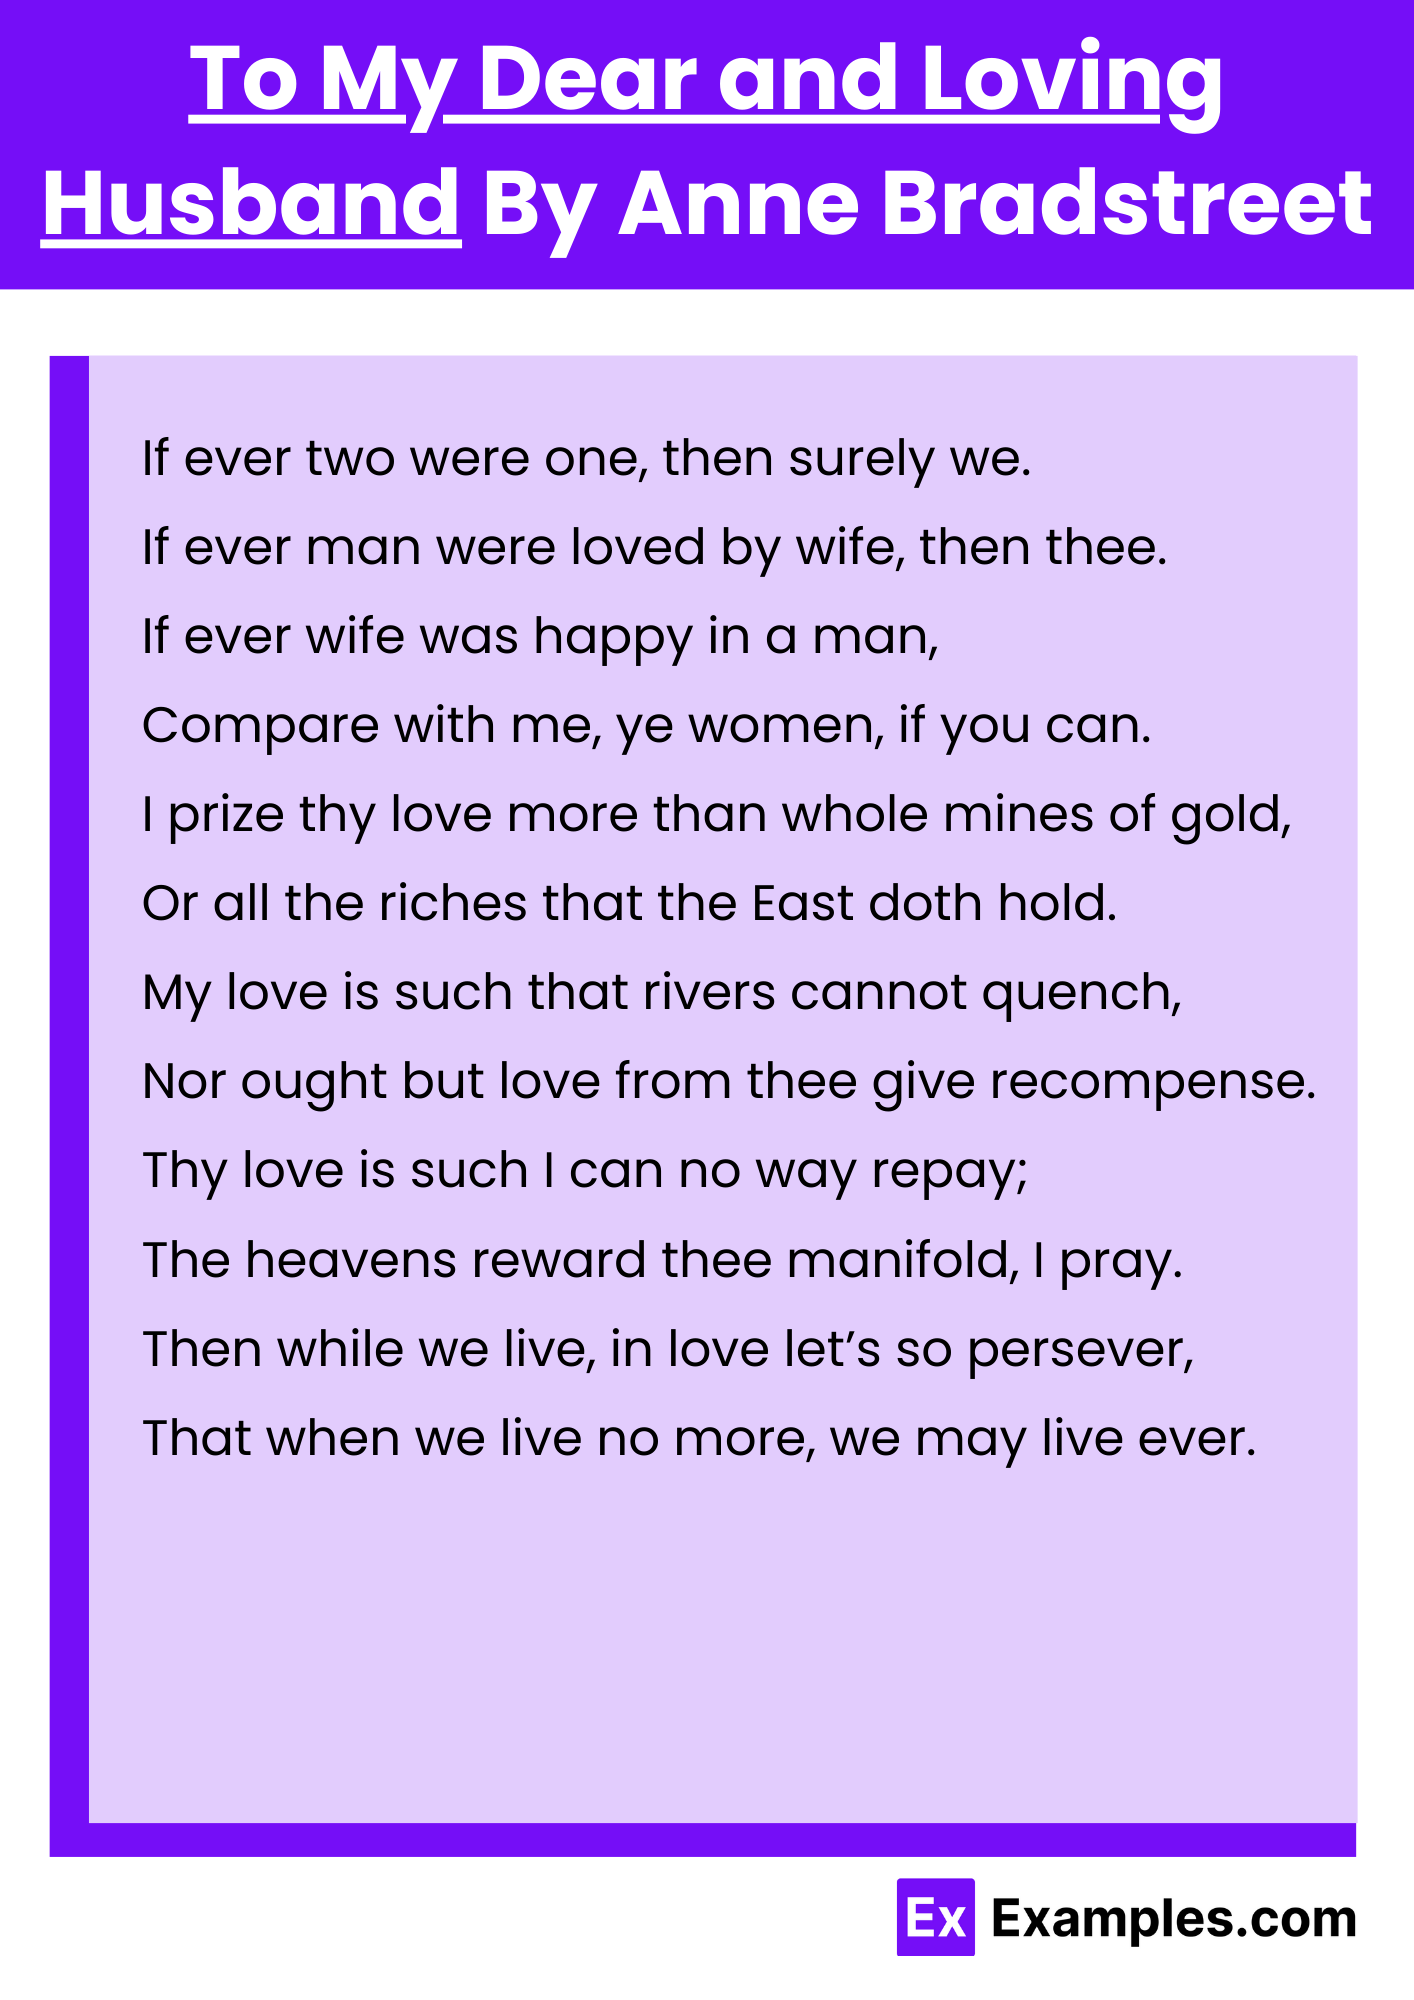 To My Dear and Loving Husband By Anne Bradstreet